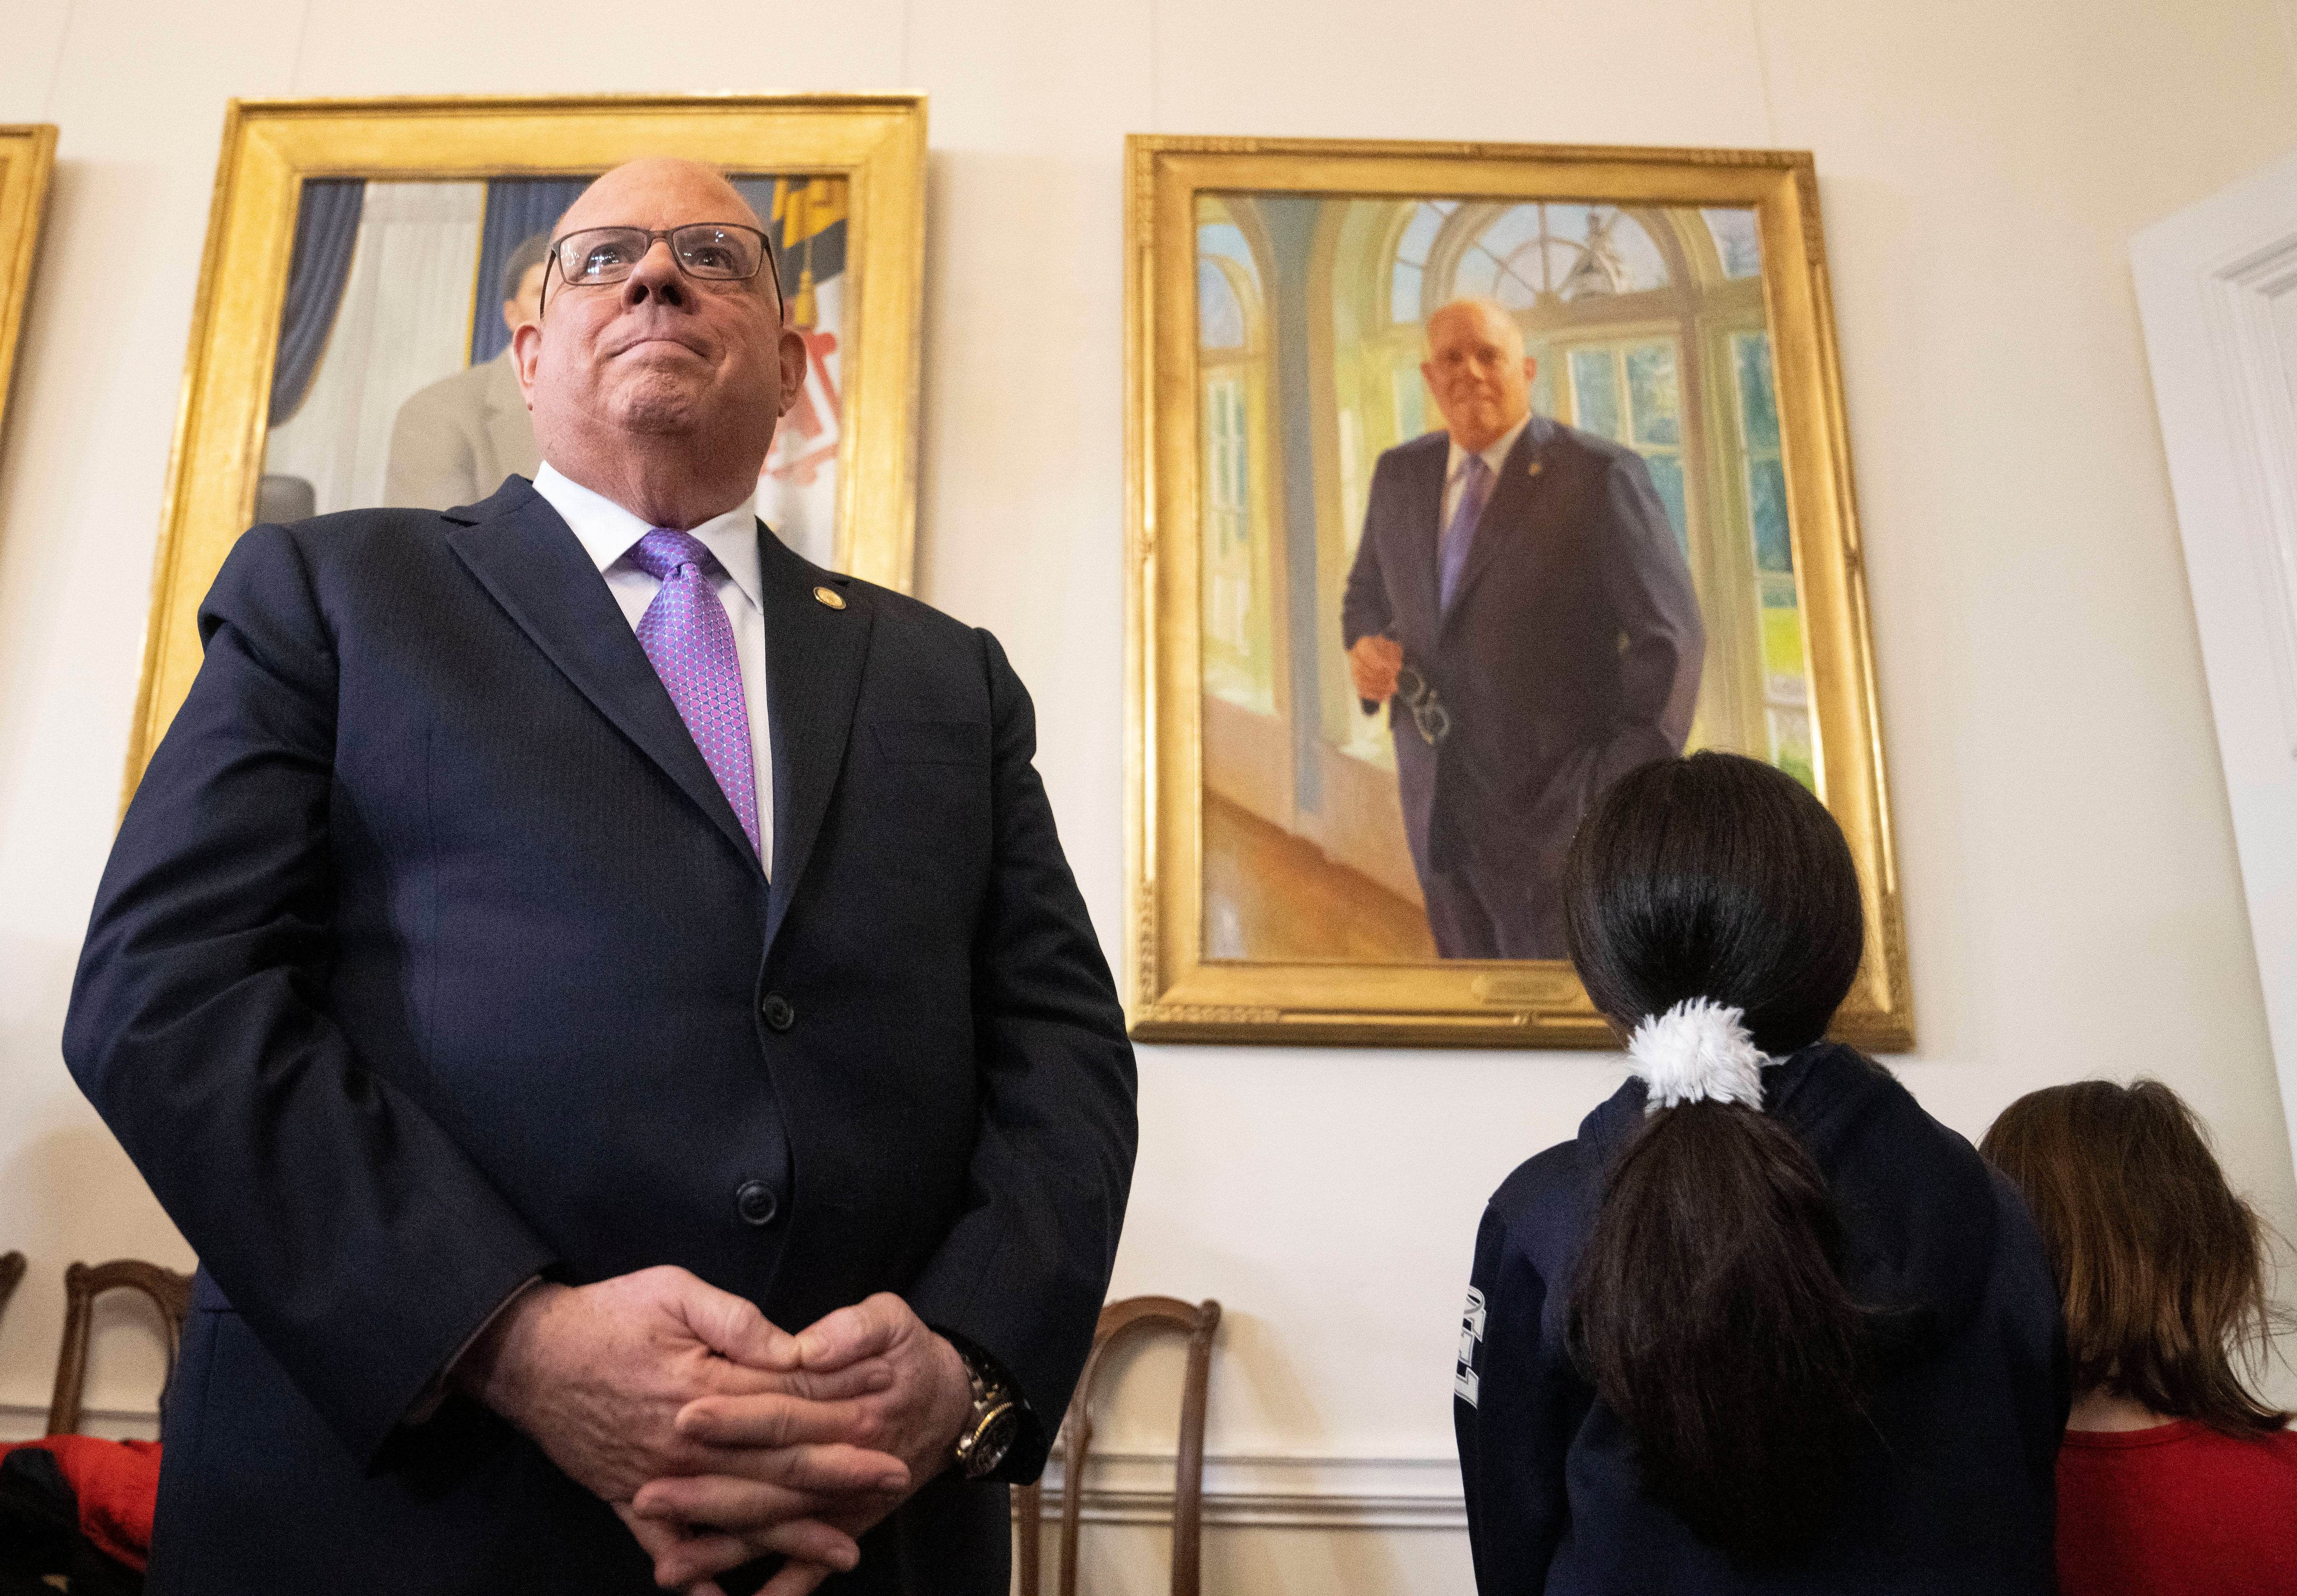 Maryland Gov. Larry Hogan after pulling down a cloth to reveal his portrait during the the hanging of his official portrait in the Governor's Reception Room, in Annapolis, Tuesday, January 10, 2023.